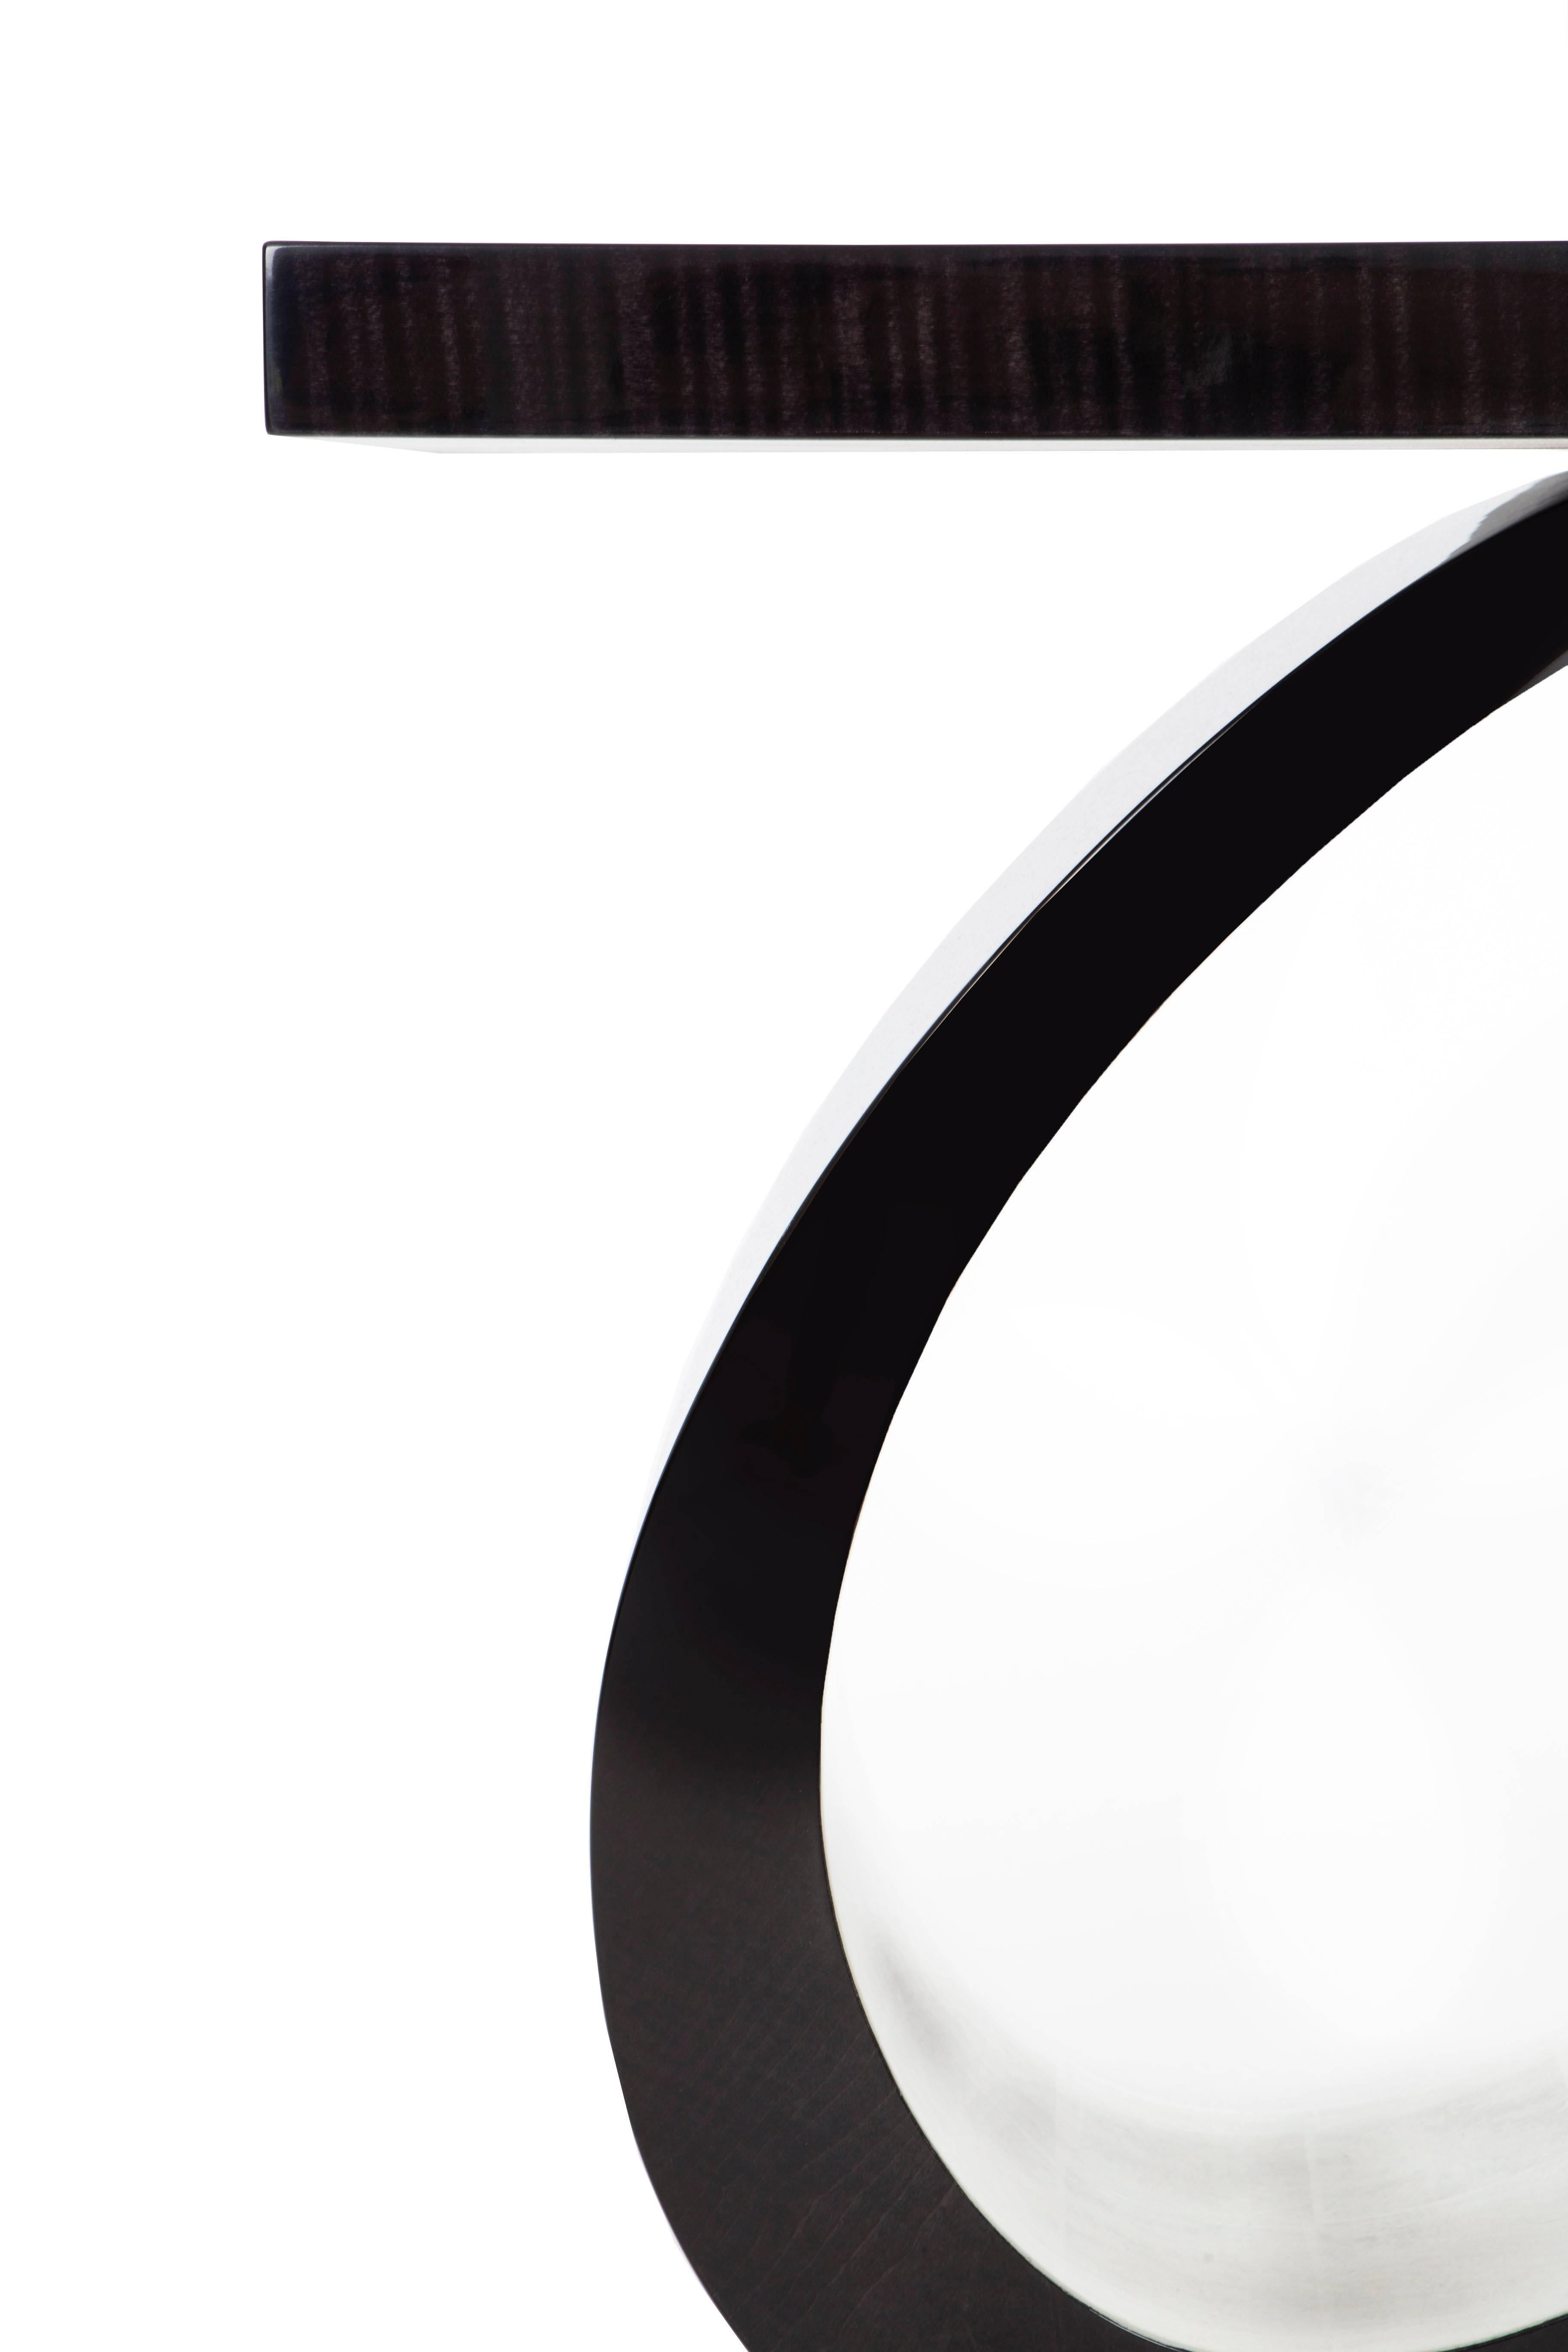 An iconic occasional table finished in sycamore black & white gold leaf.

With sleek edges and smooth curves, dark dramatic hues contrasted with lustrous white gold leaf, this is one of our most highly sought after occasional tables from the